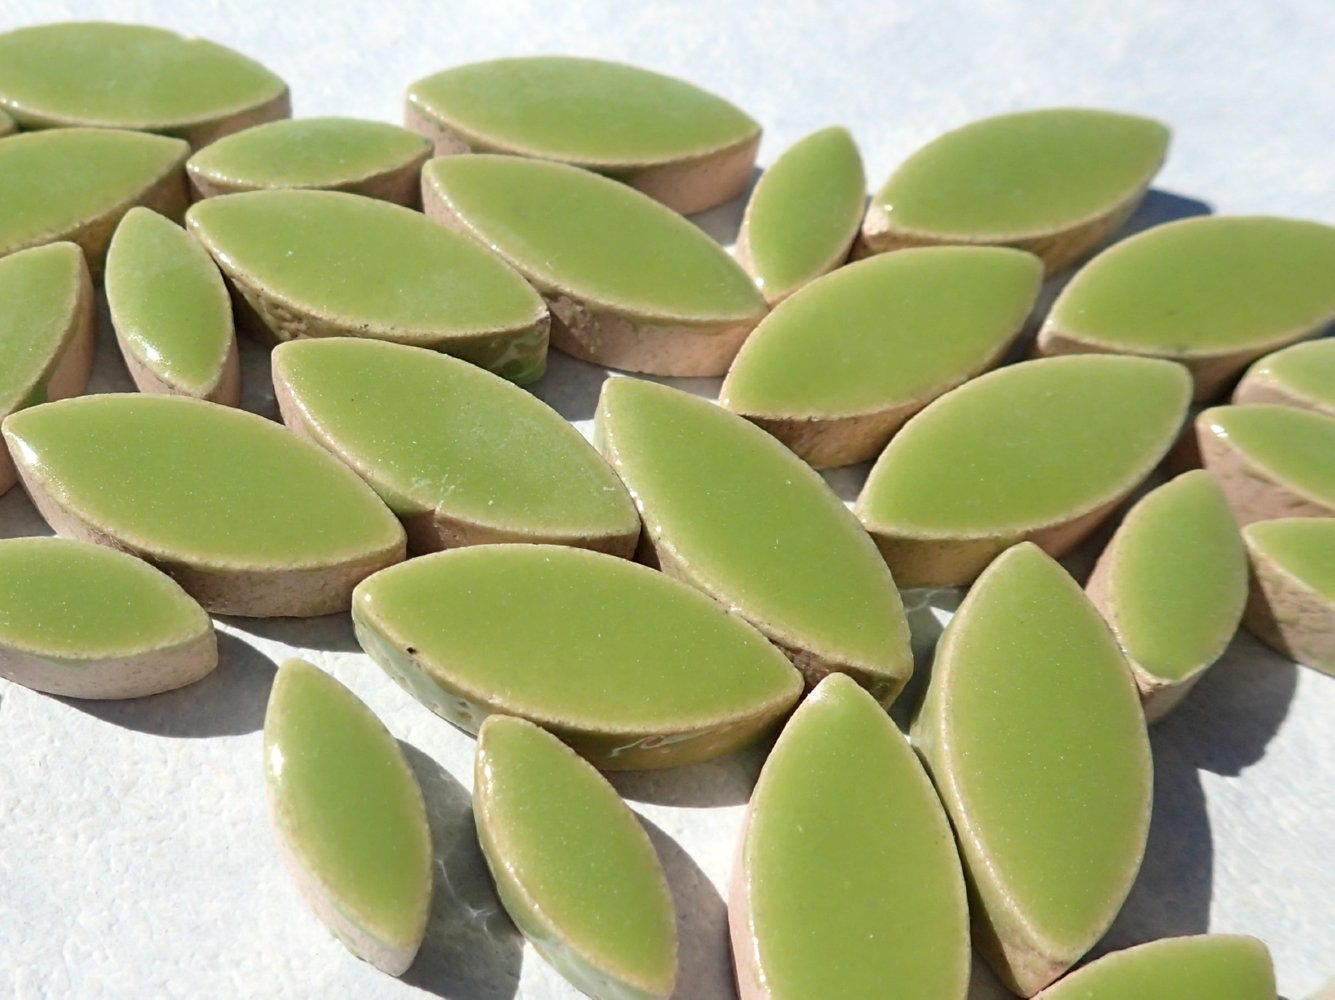 Kiwi Green Petals Mosaic Tiles - 50g Ceramic Leaves in Mix of 2 Sizes 1/2" and 3/4"